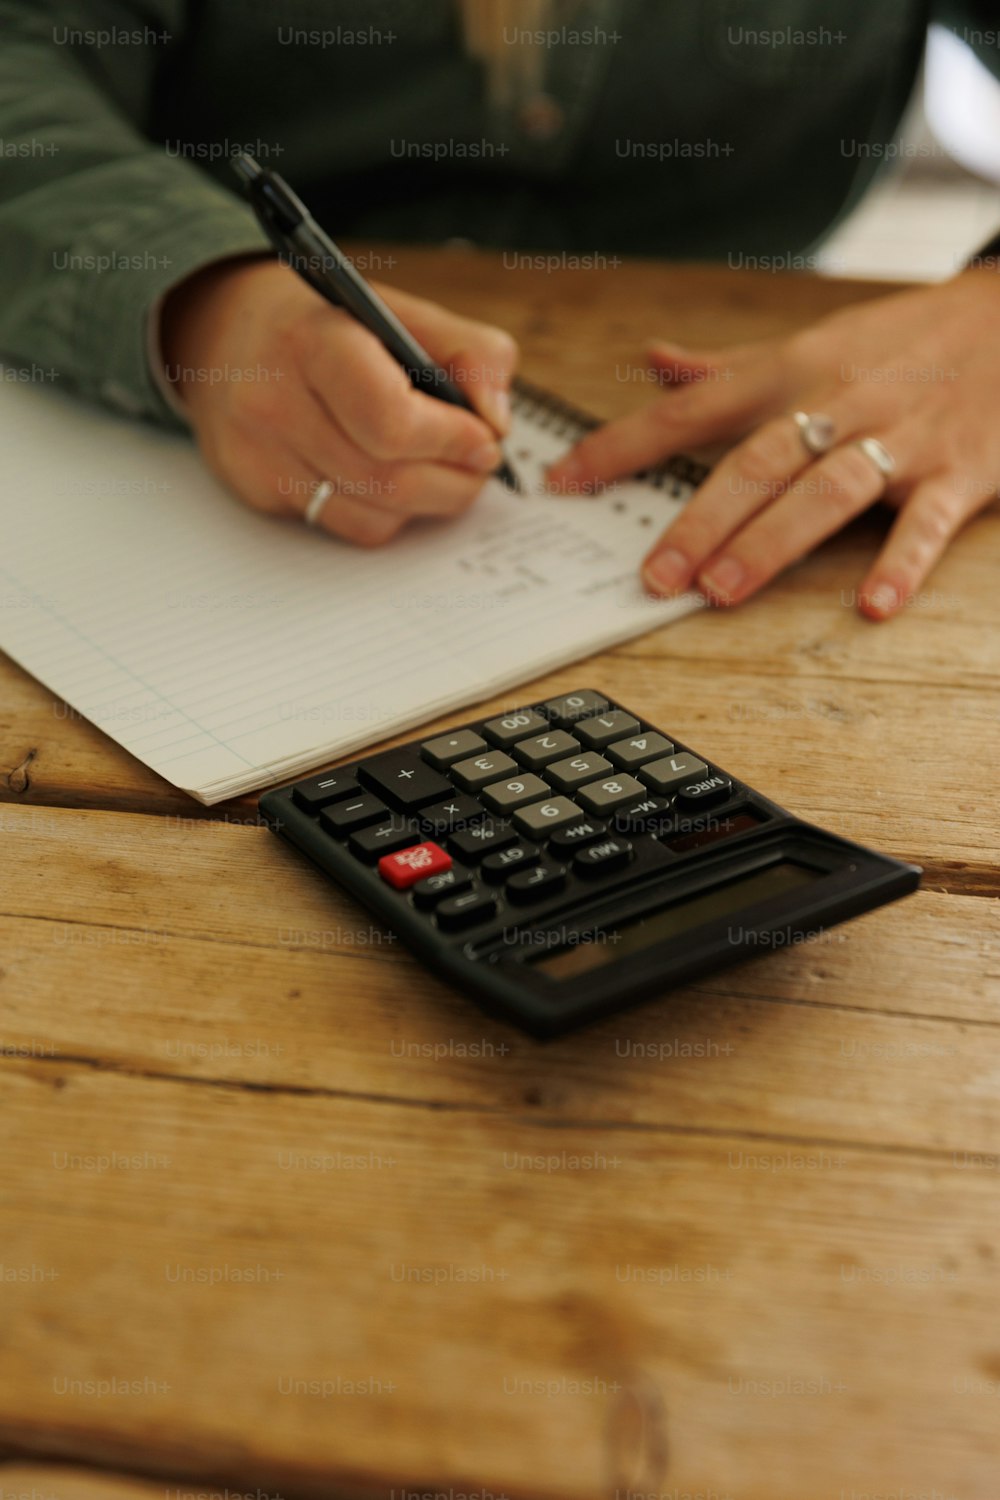 a person writing on a piece of paper next to a calculator